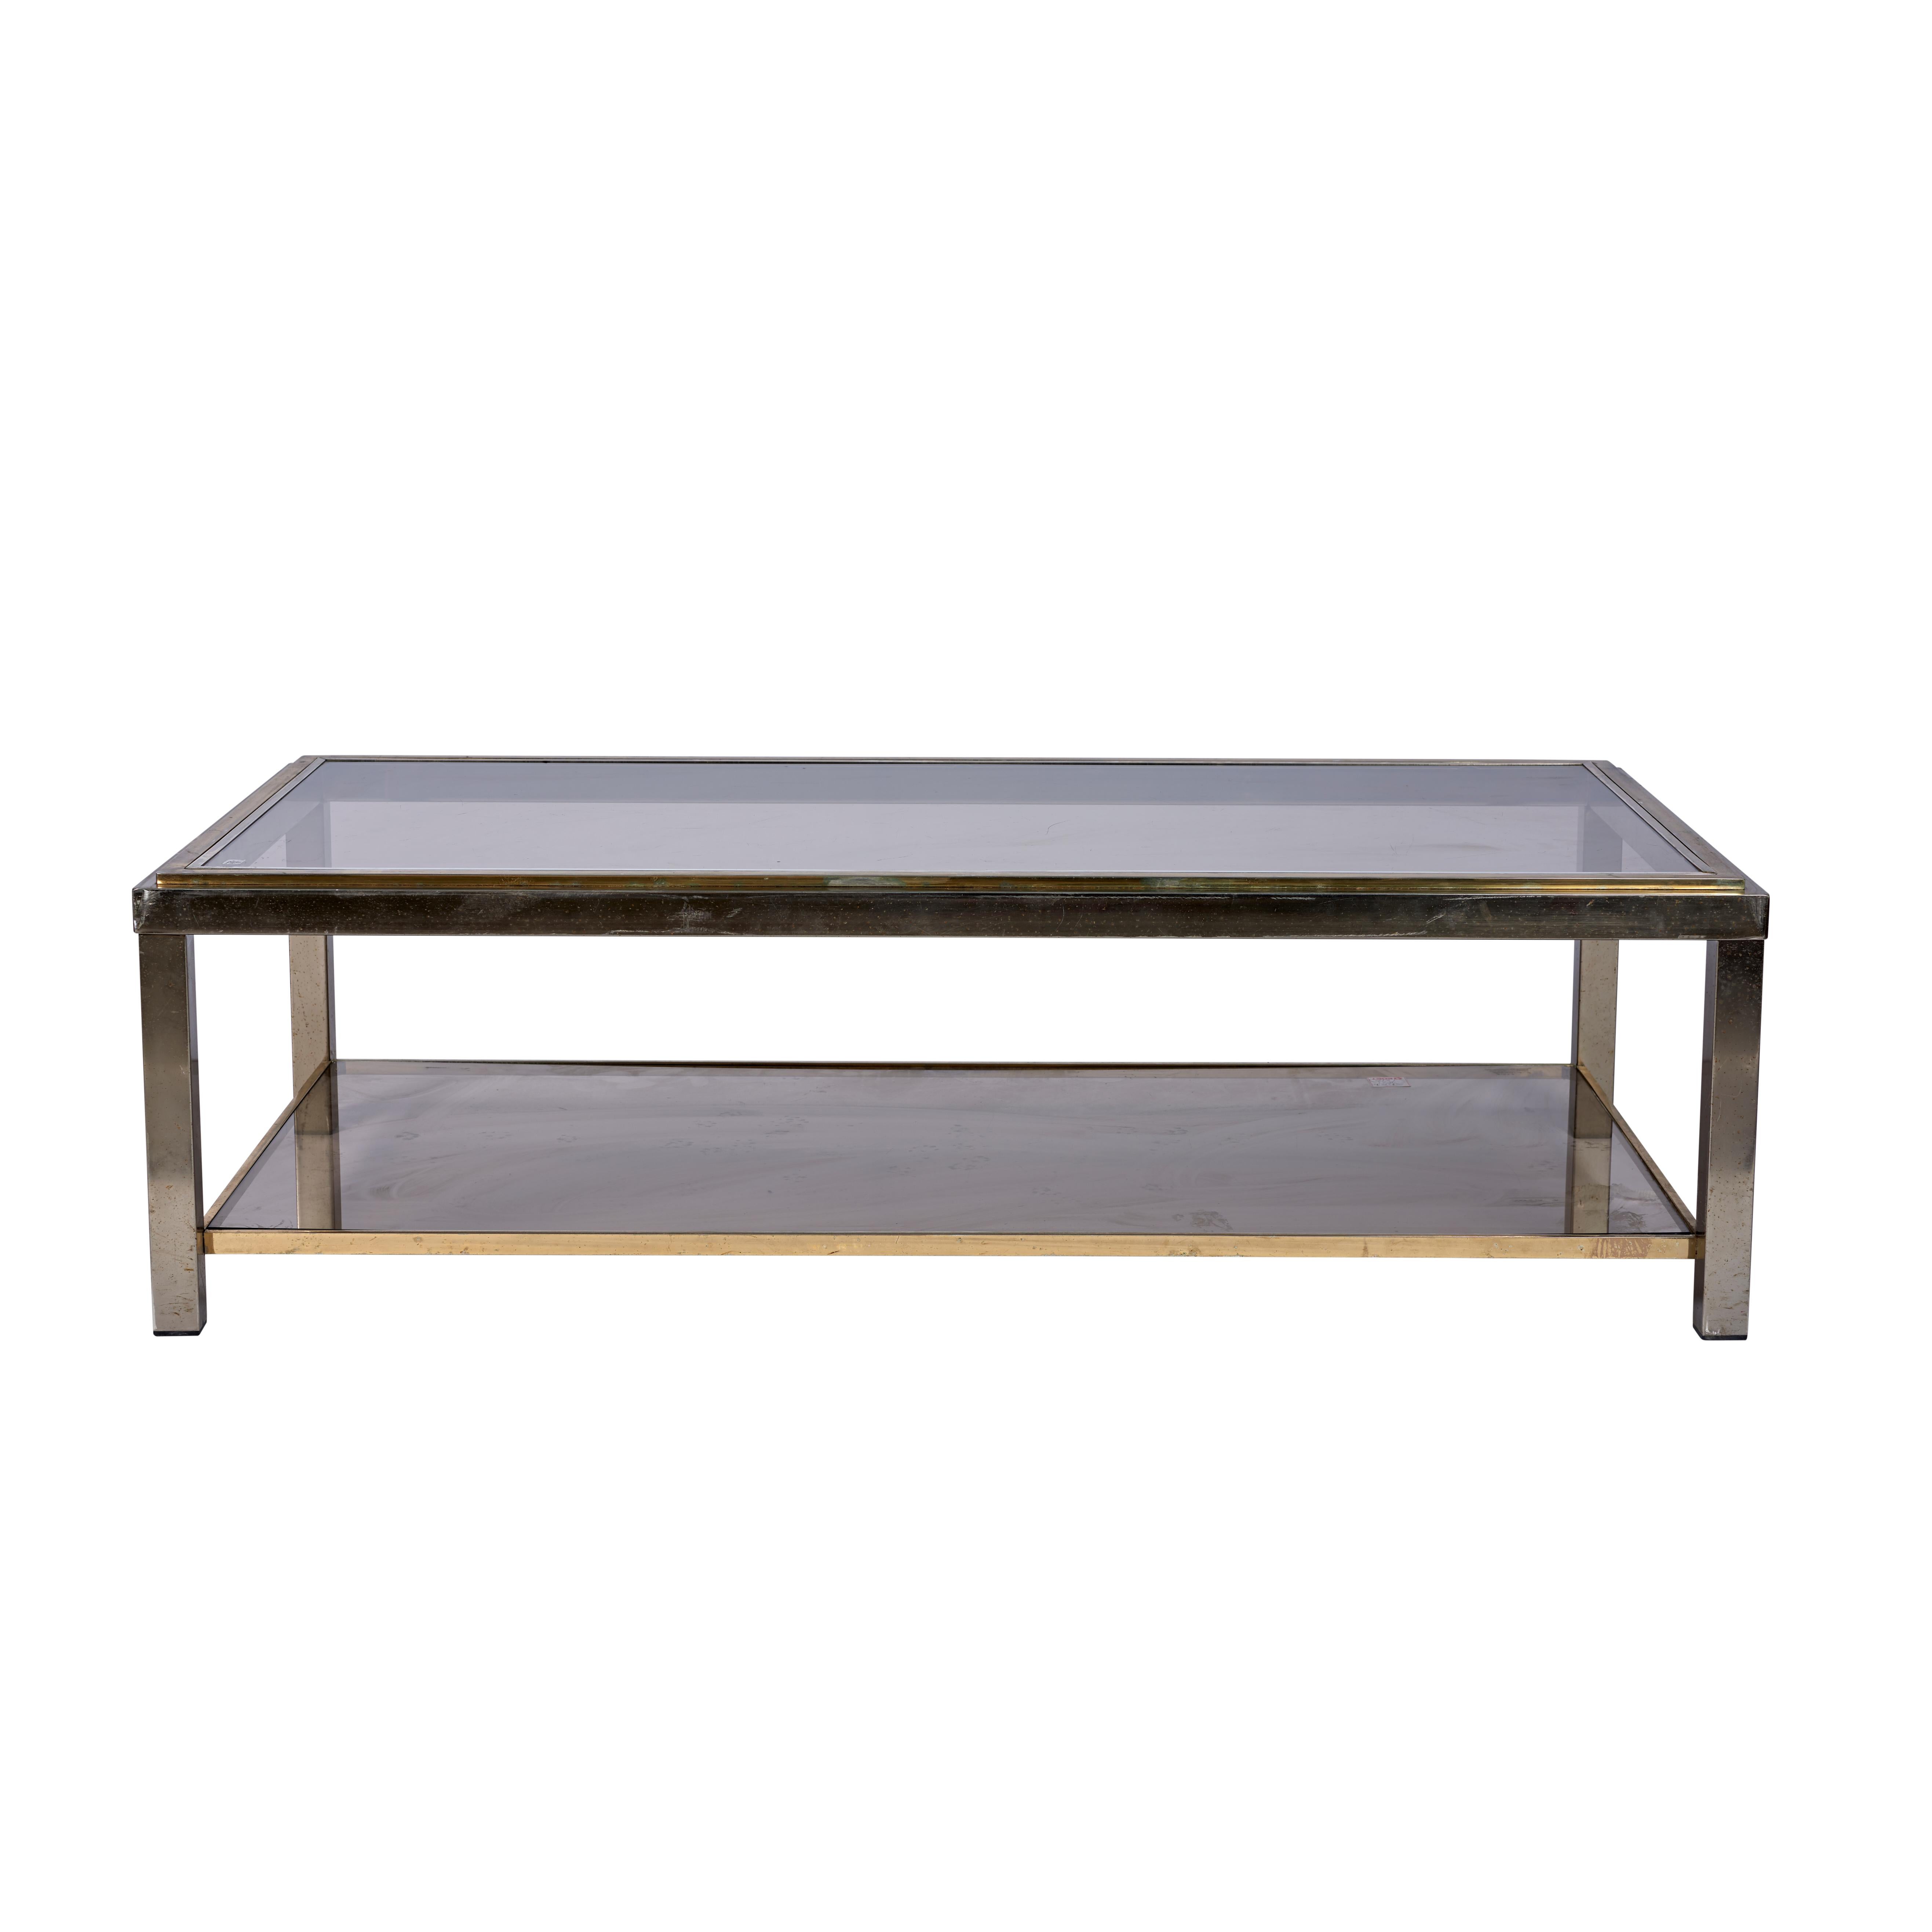 Chrome and brass coffee table by Willy Rizzo, circa 1950, Italy.

Since Schumacher was founded in 1889, our family-owned company has been synonymous with style, taste, and innovation. A passion for luxury and an unwavering commitment to beauty are